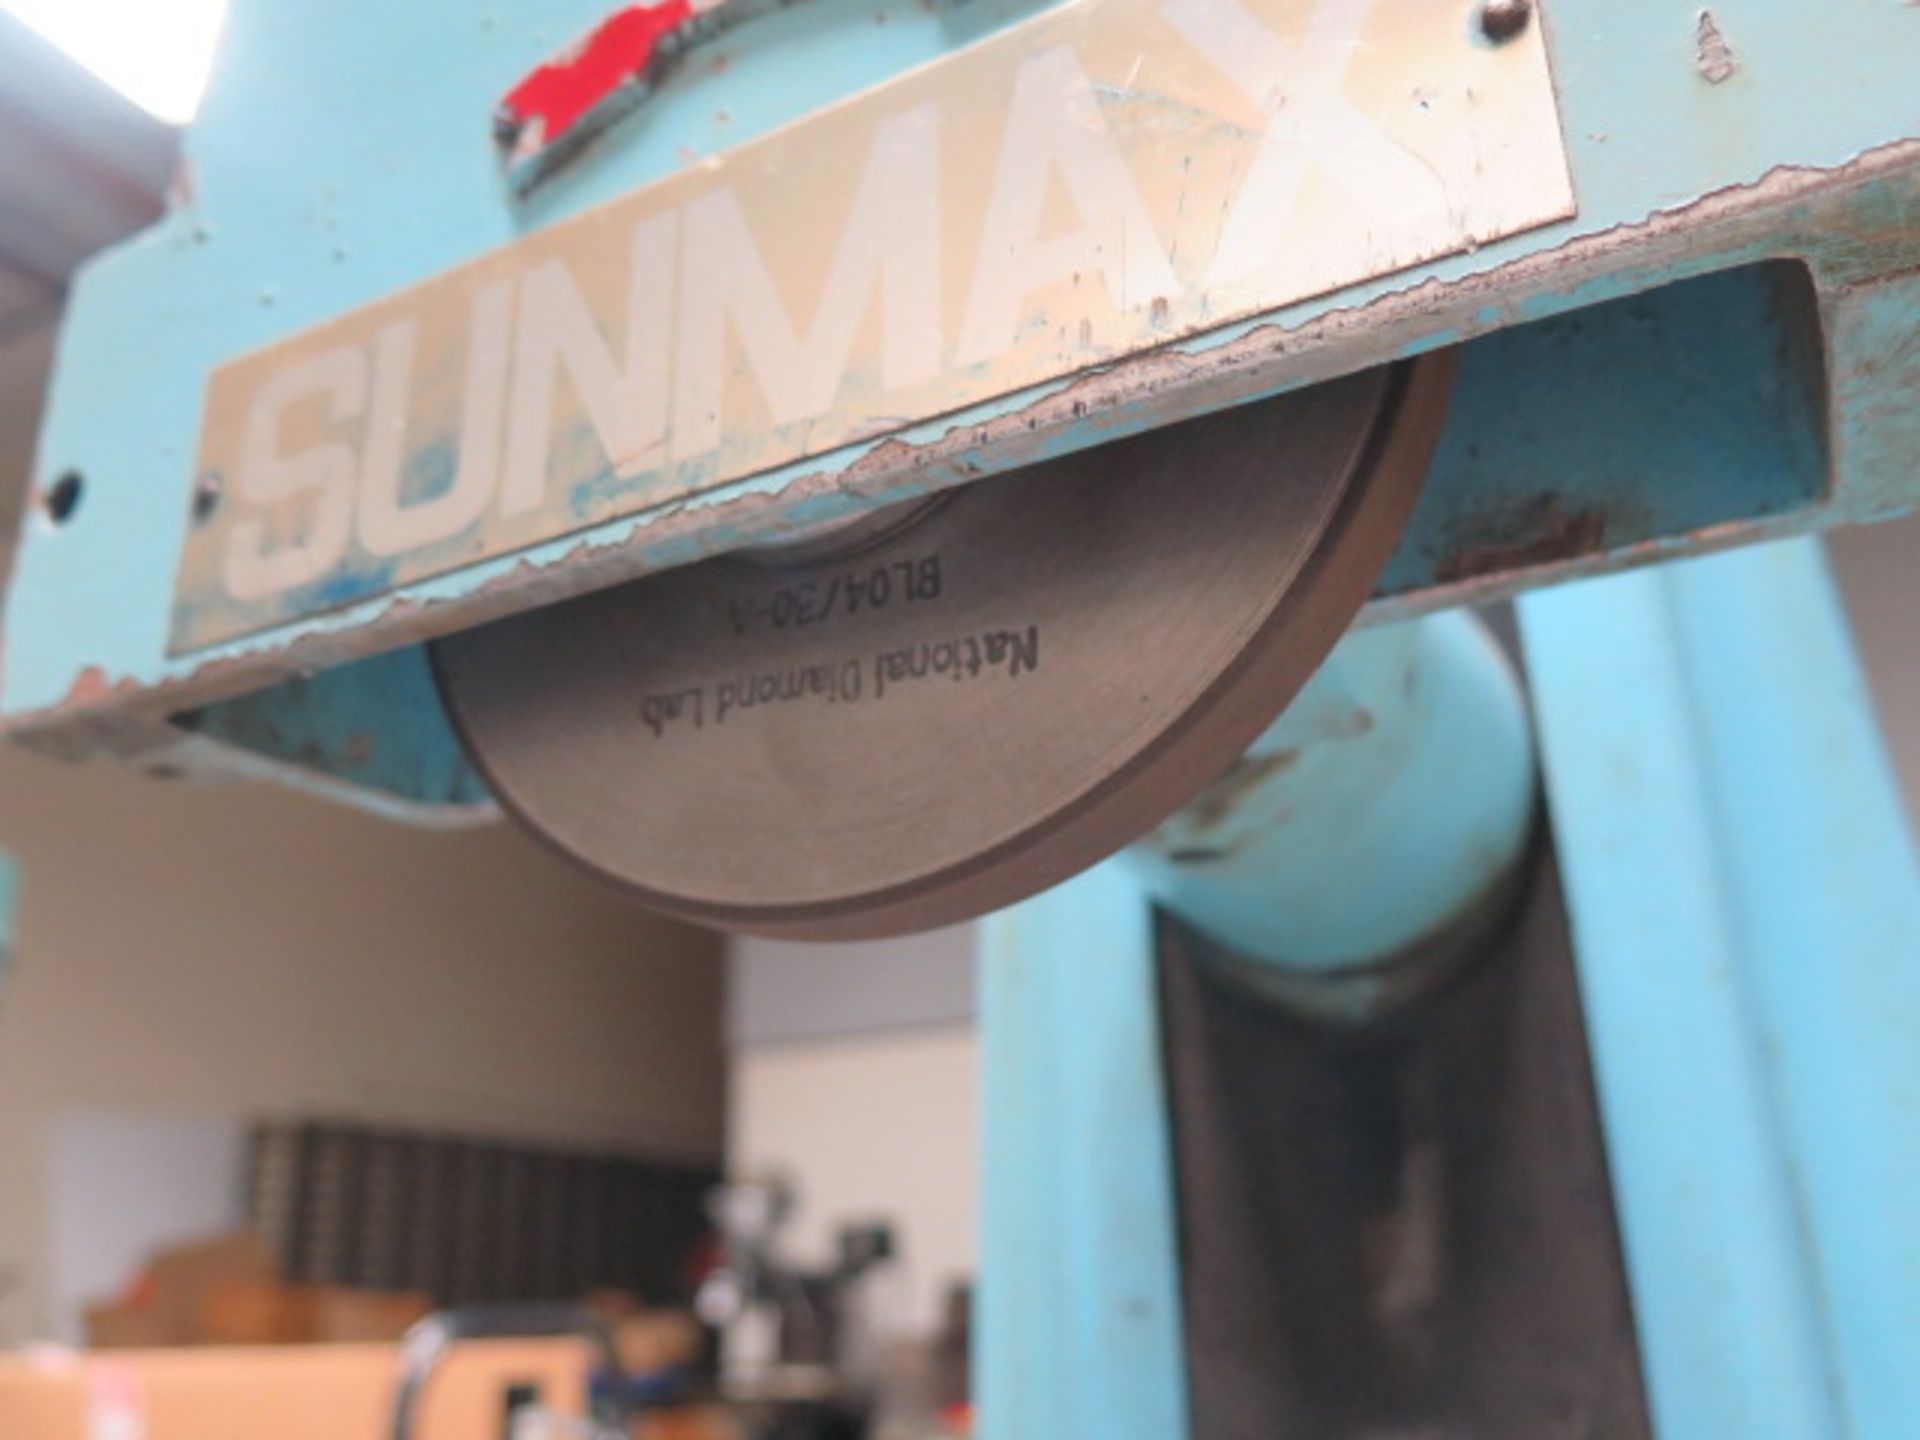 Sunmax 6" x 18" Surface Grinder w/ 5" x 10" Magnetic Chuck (SOLD AS-IS - NO WARRANTY) - Image 6 of 7